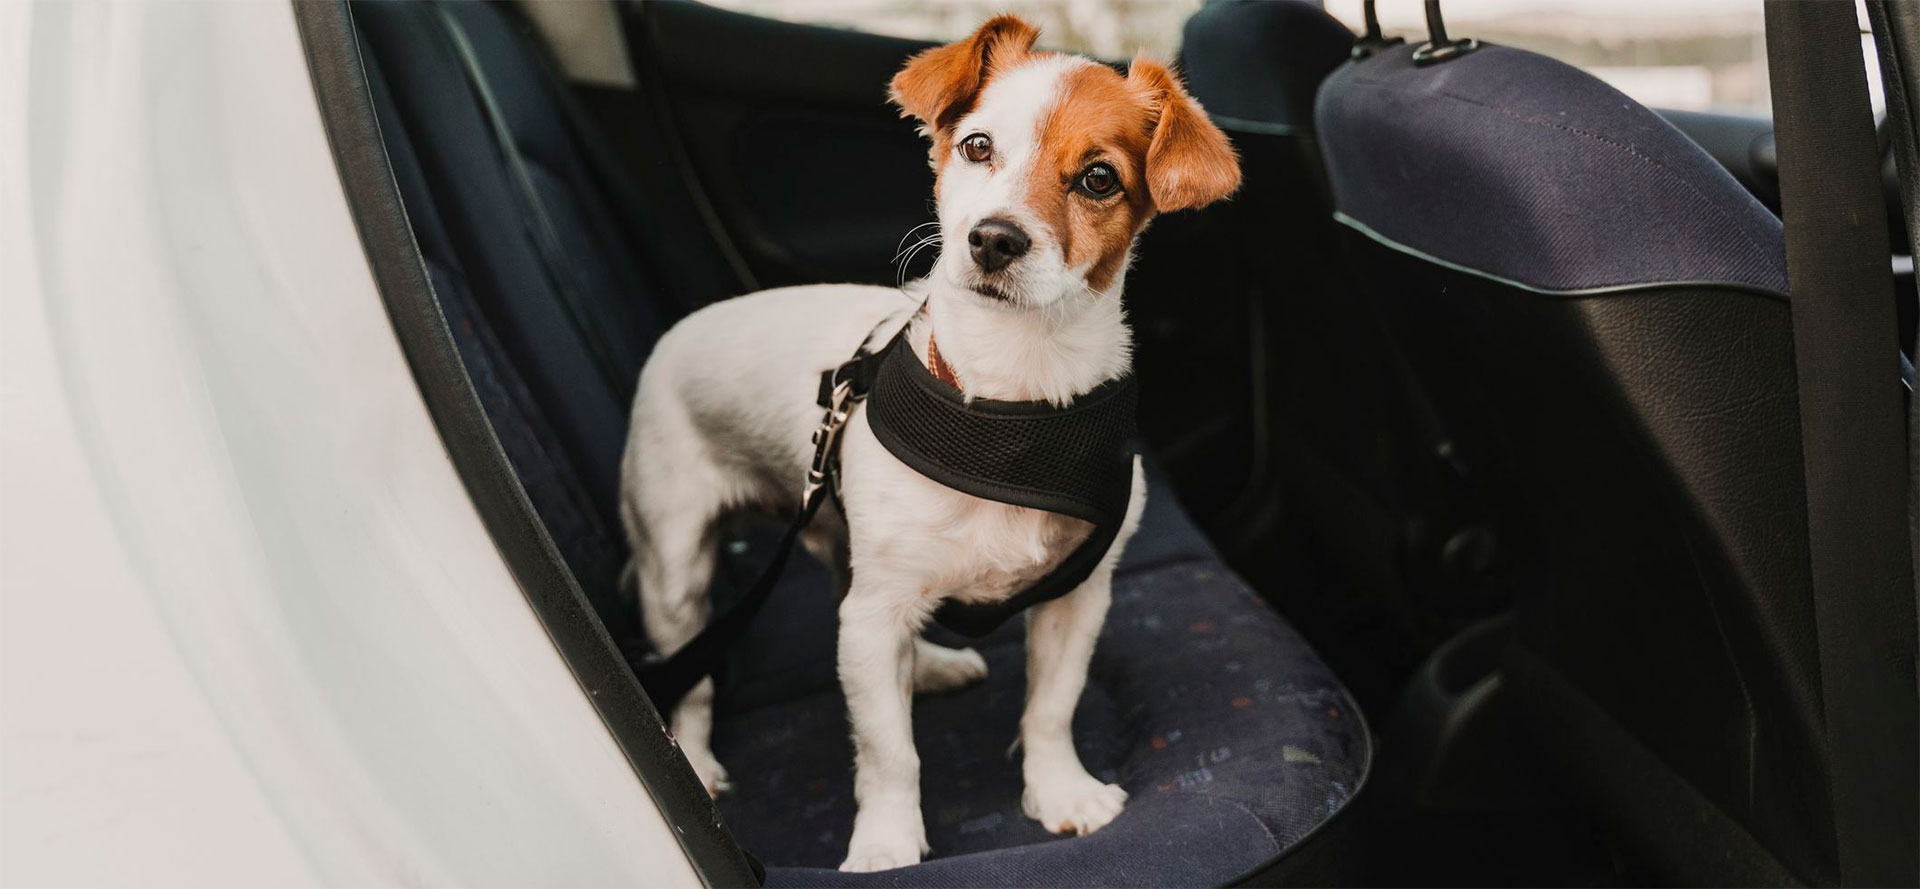 Dog waiting for a seat belt  in a car.